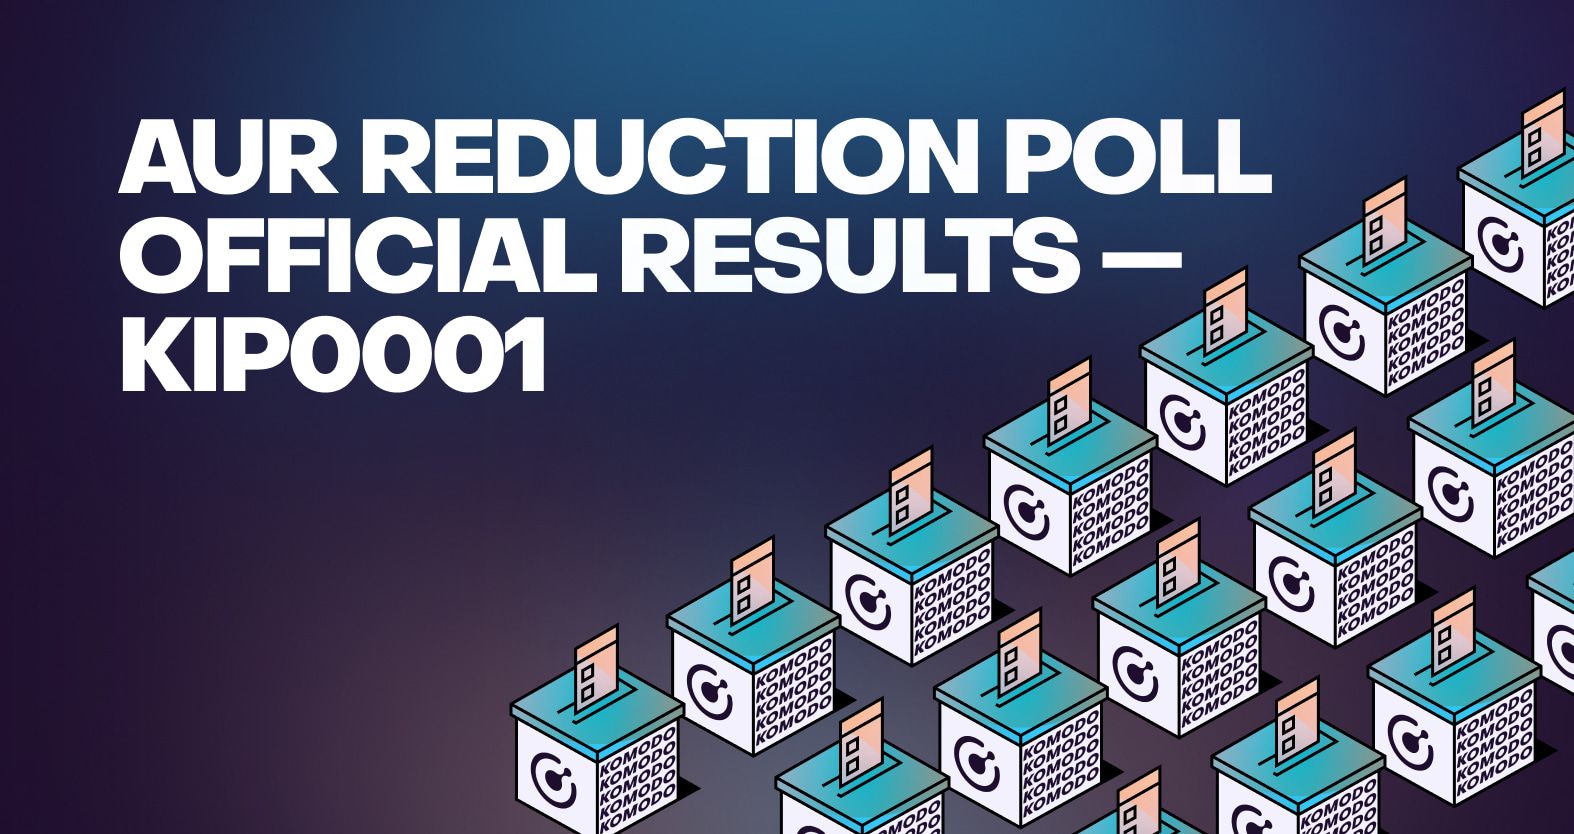 AUR Reduction Poll Official Results — KIP0001